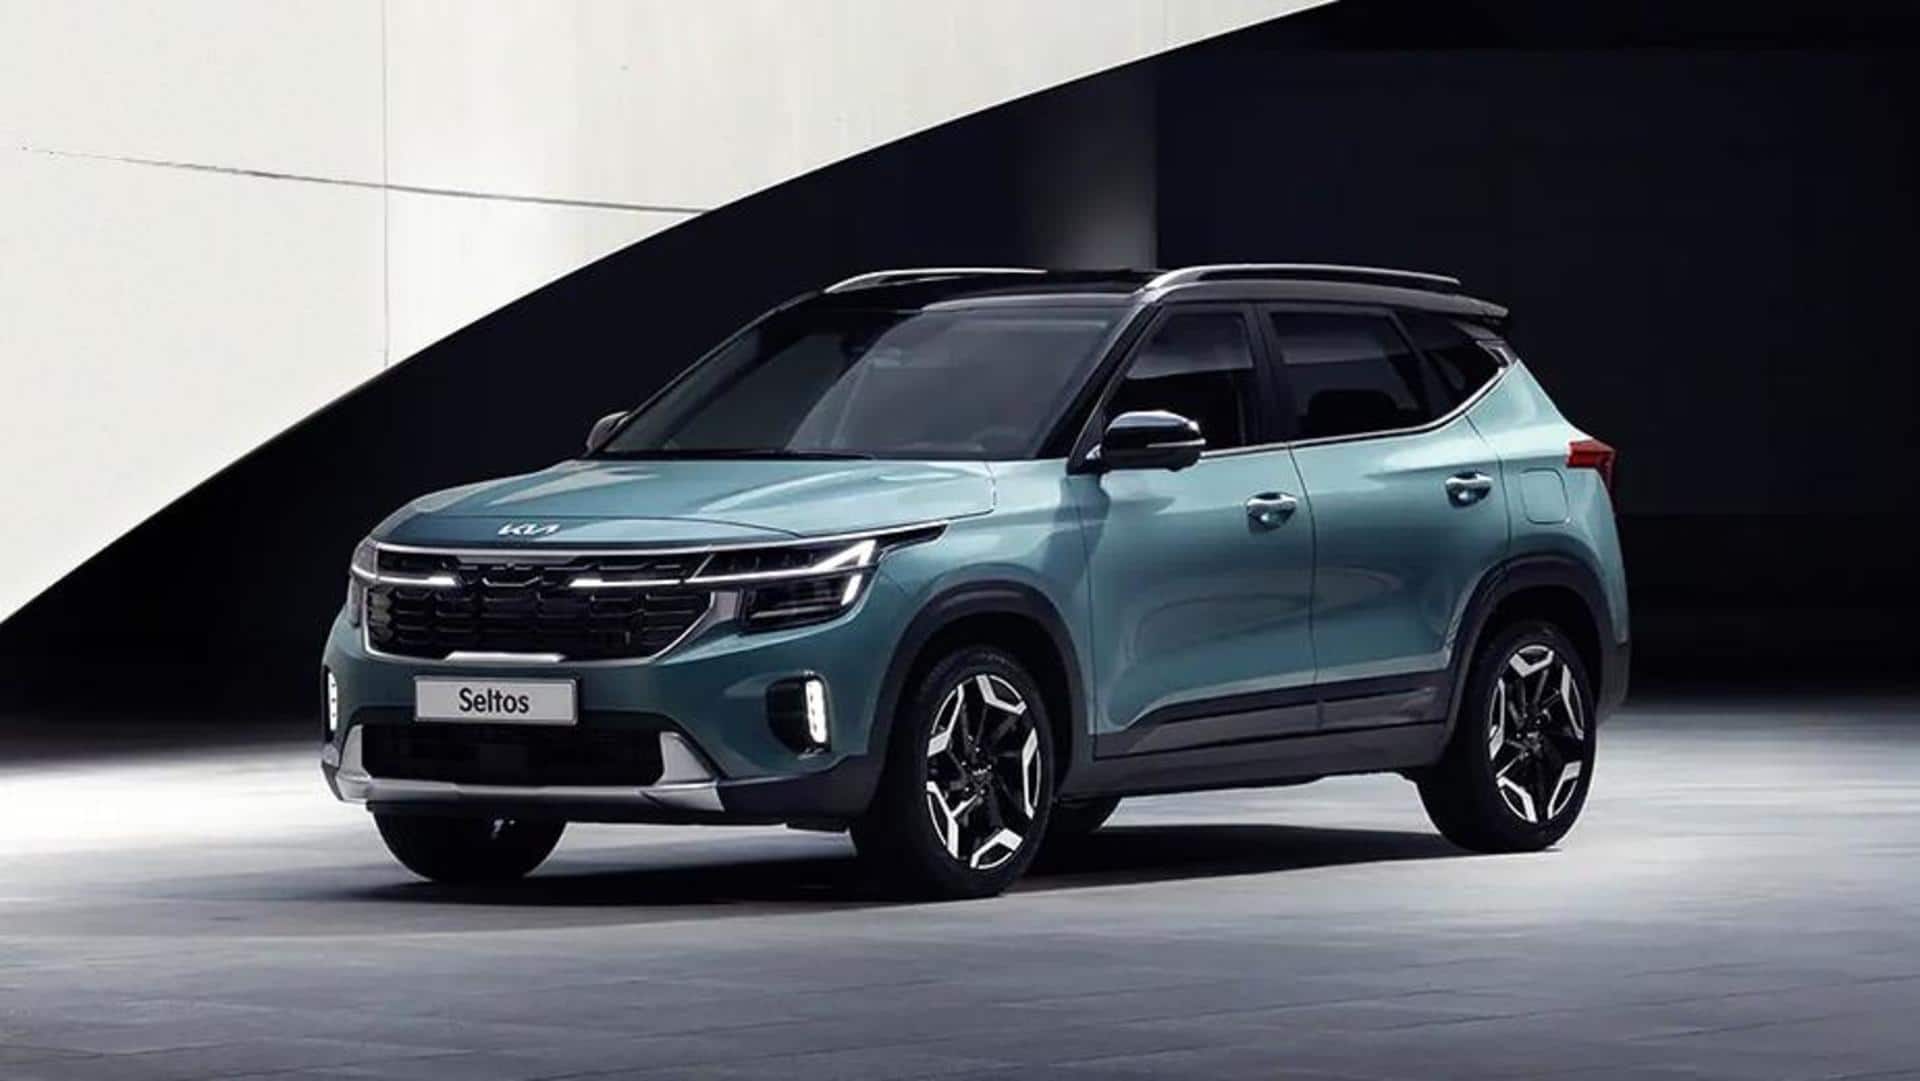 Kia Seltos (facelift) to debut in India on July 4